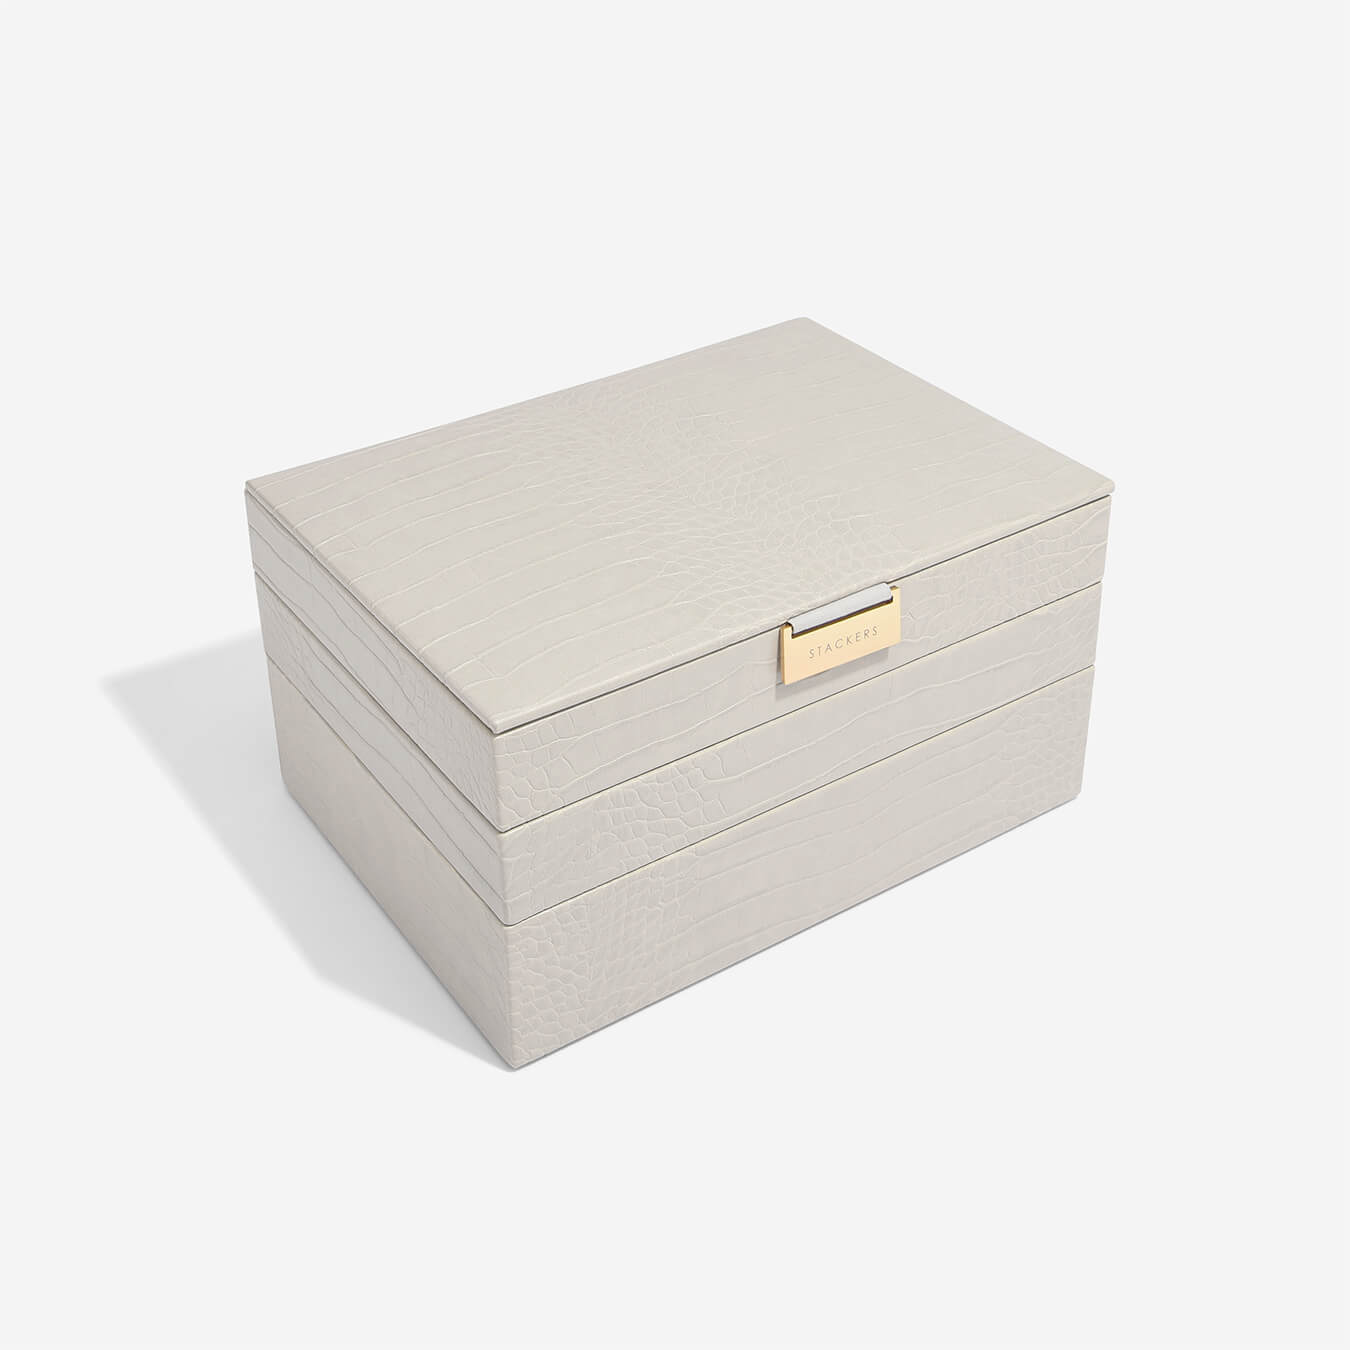 Real Review of Stackers London UK Glass Beveled White Jewellery Boxes  (Unbiased, Unsponsored Blogger Opinion) • Save. Spend. Splurge.